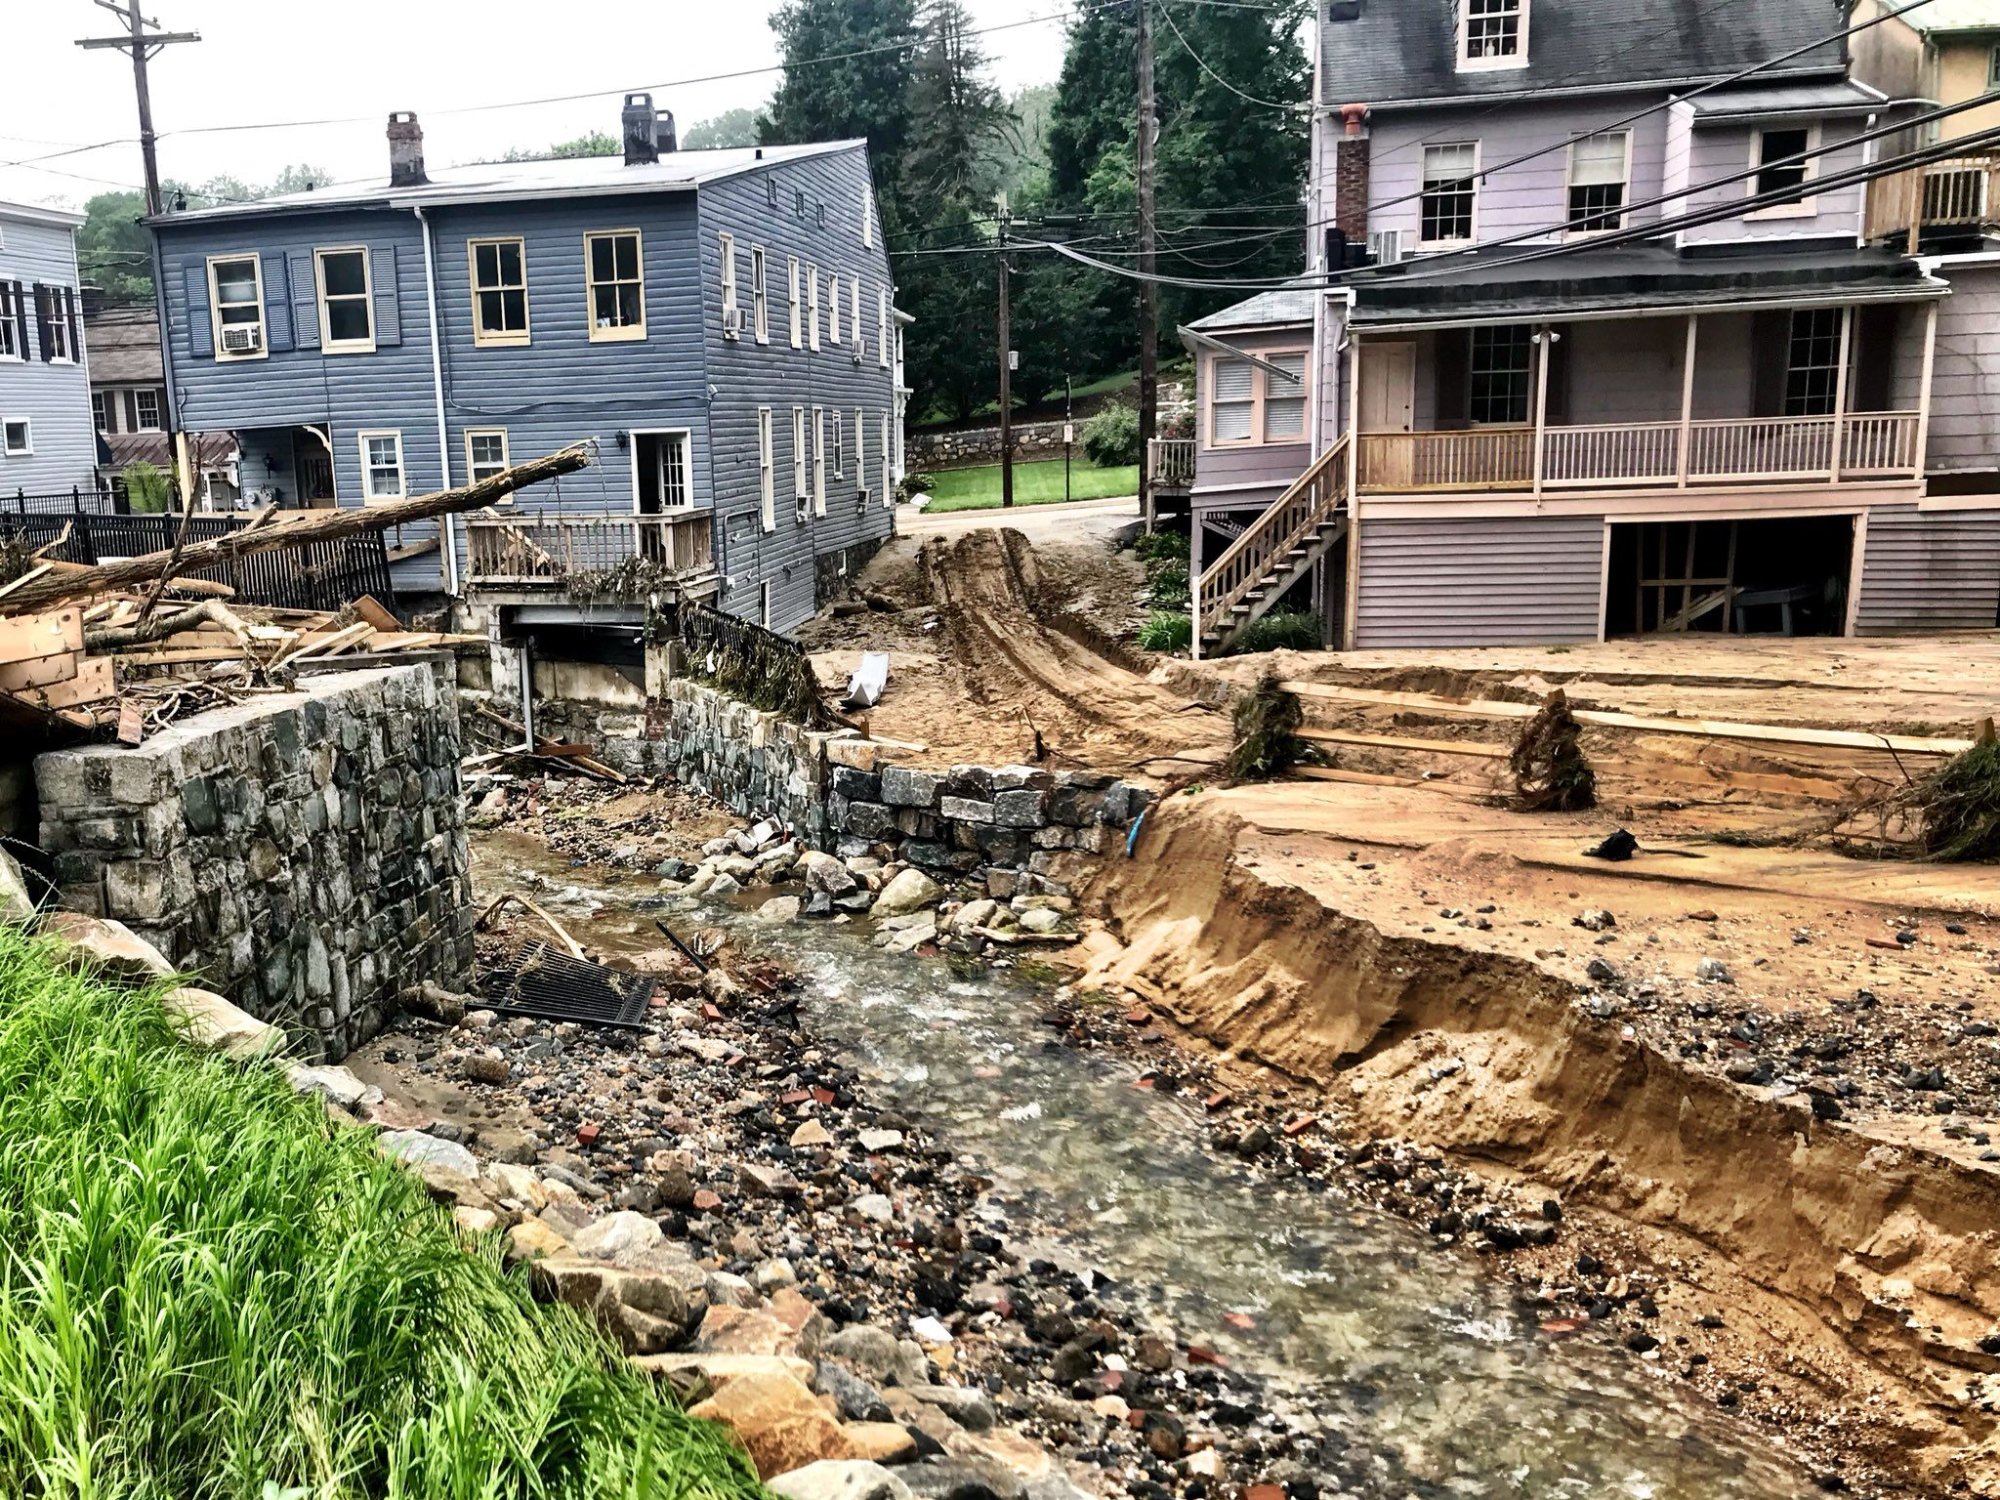 Ellicott City residents, owners get 1st glimpse of floodravaged Main